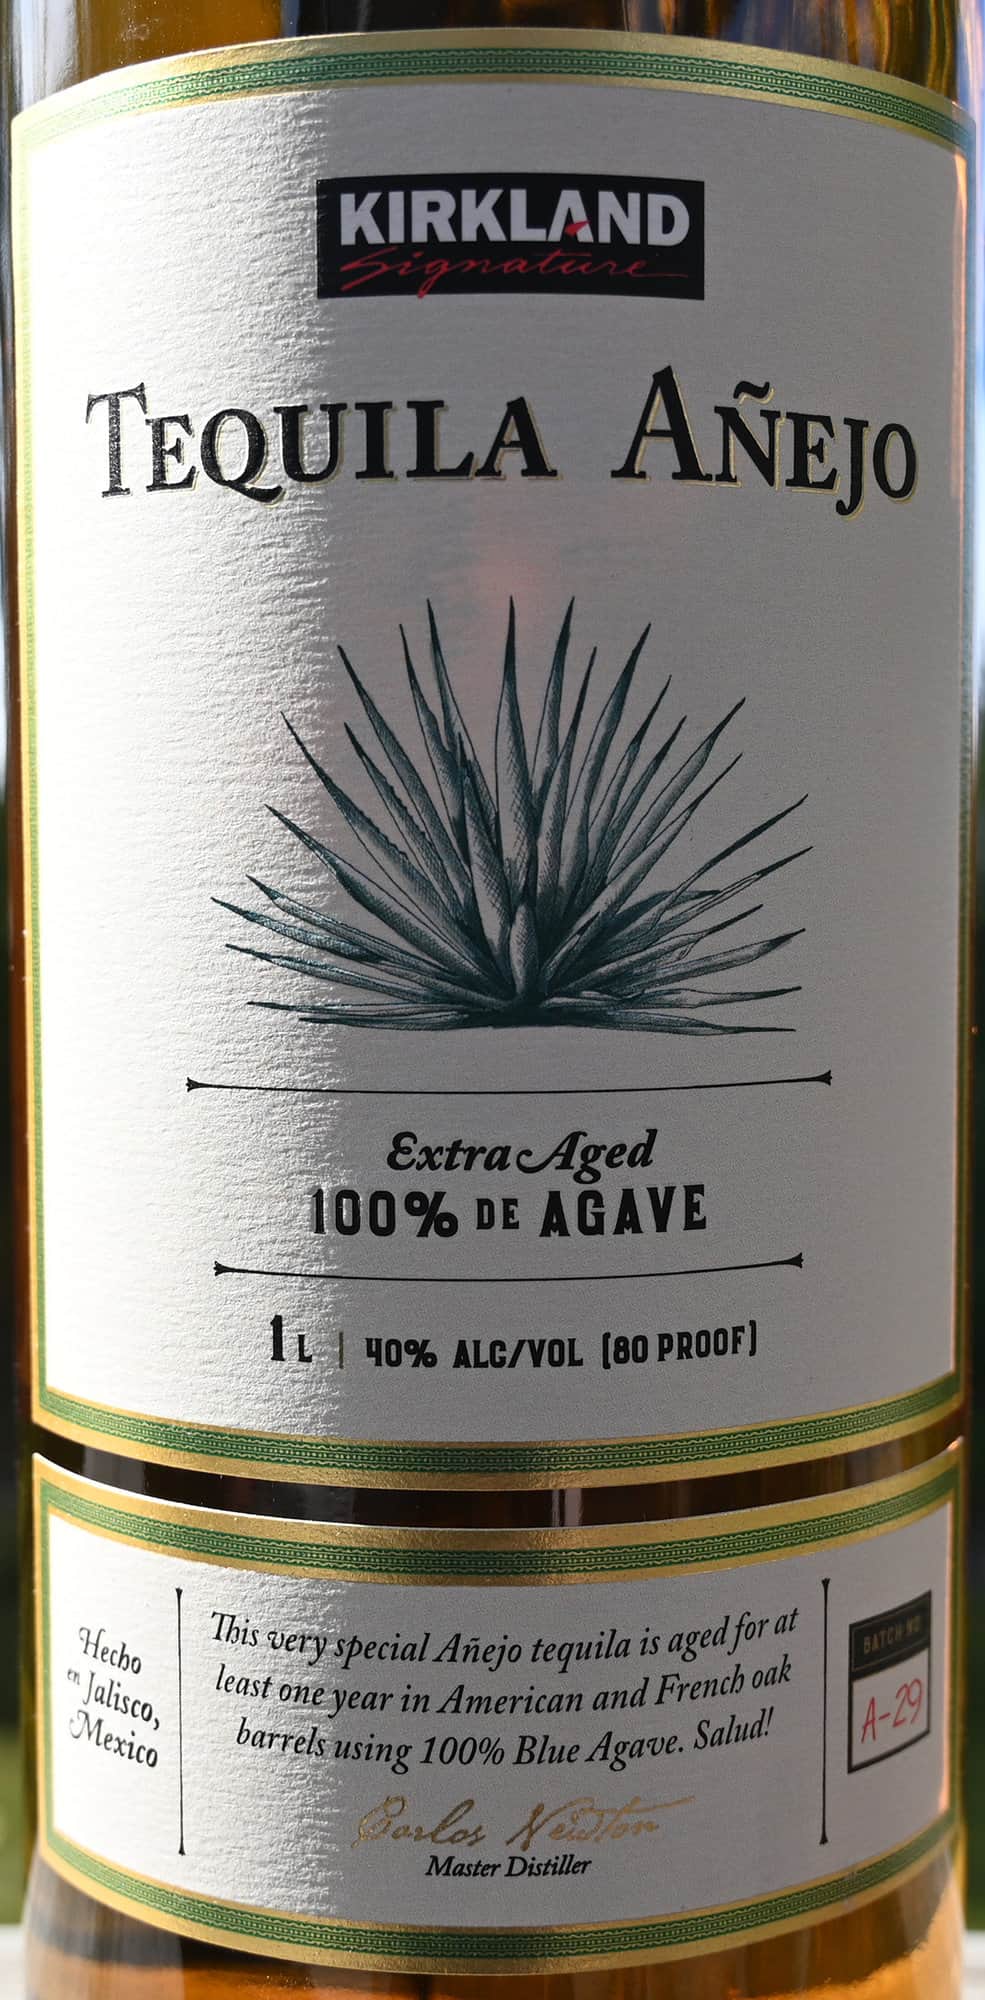 Closeup image of the front label on the anejo tequila showing alcohol percentage and product description.